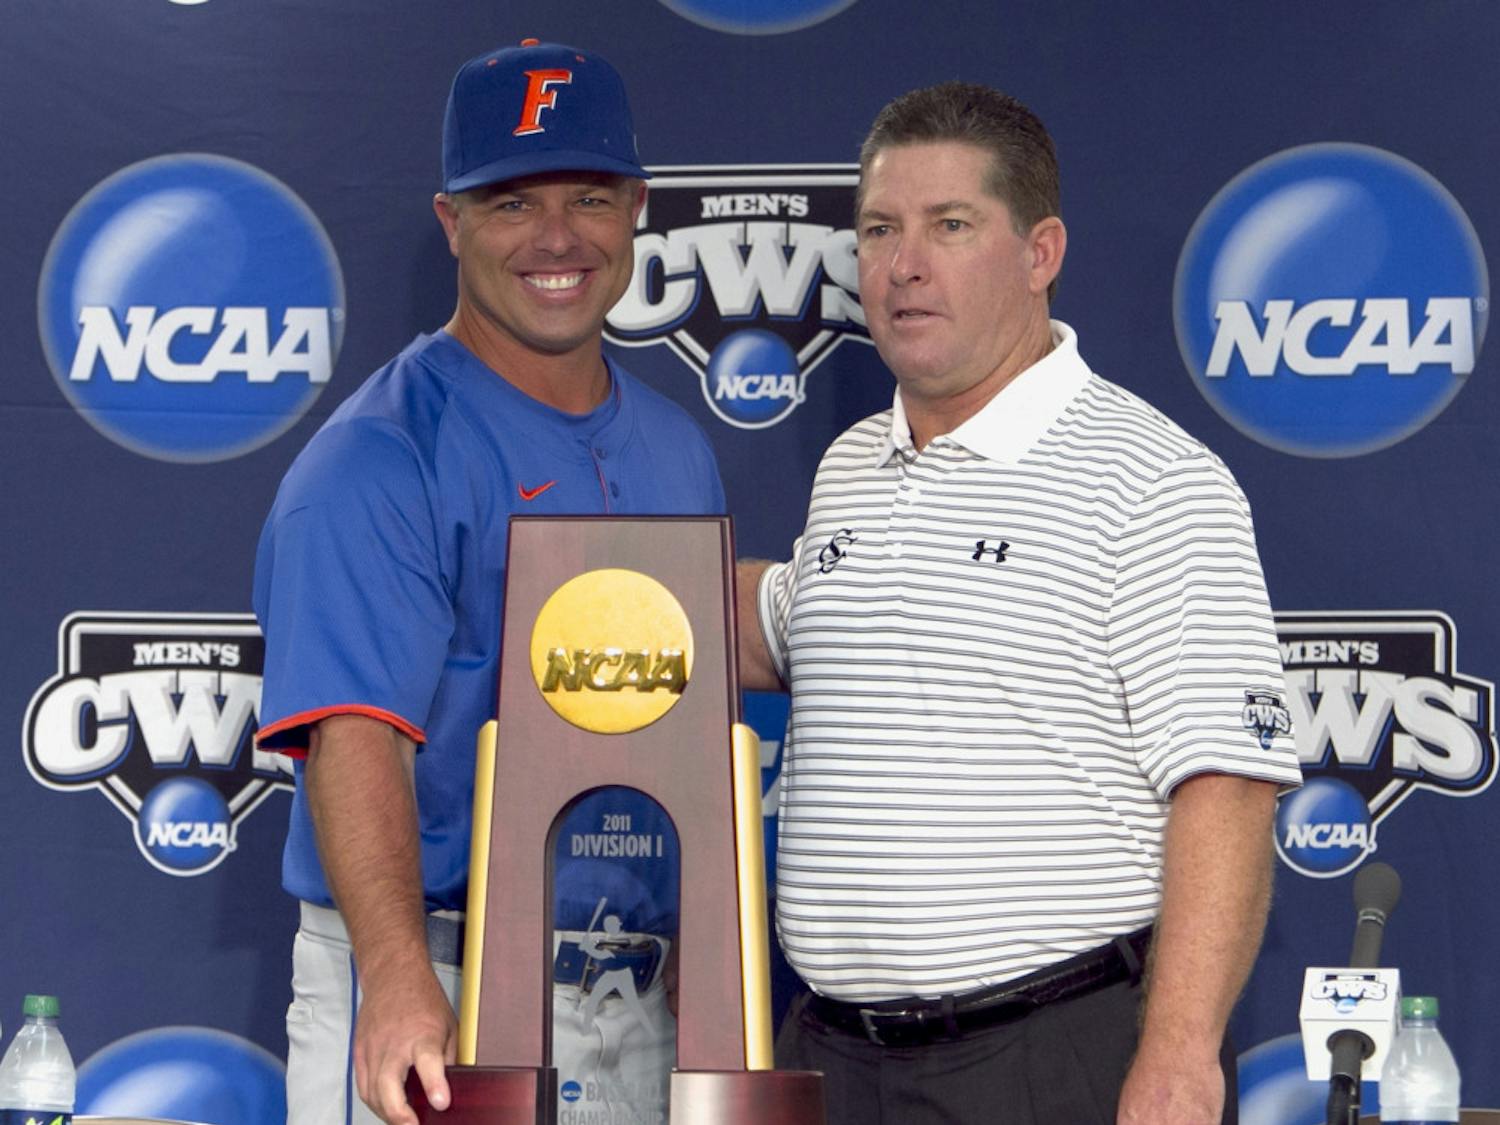 Florida baseball coach Kevin O'Sullivan, left, and South
Carolina coach Ray Tanner pose with the College World Series
trophy. The Gators and Gamecocks will play a best-of-three
championship series starting Monday at 8 p.m.